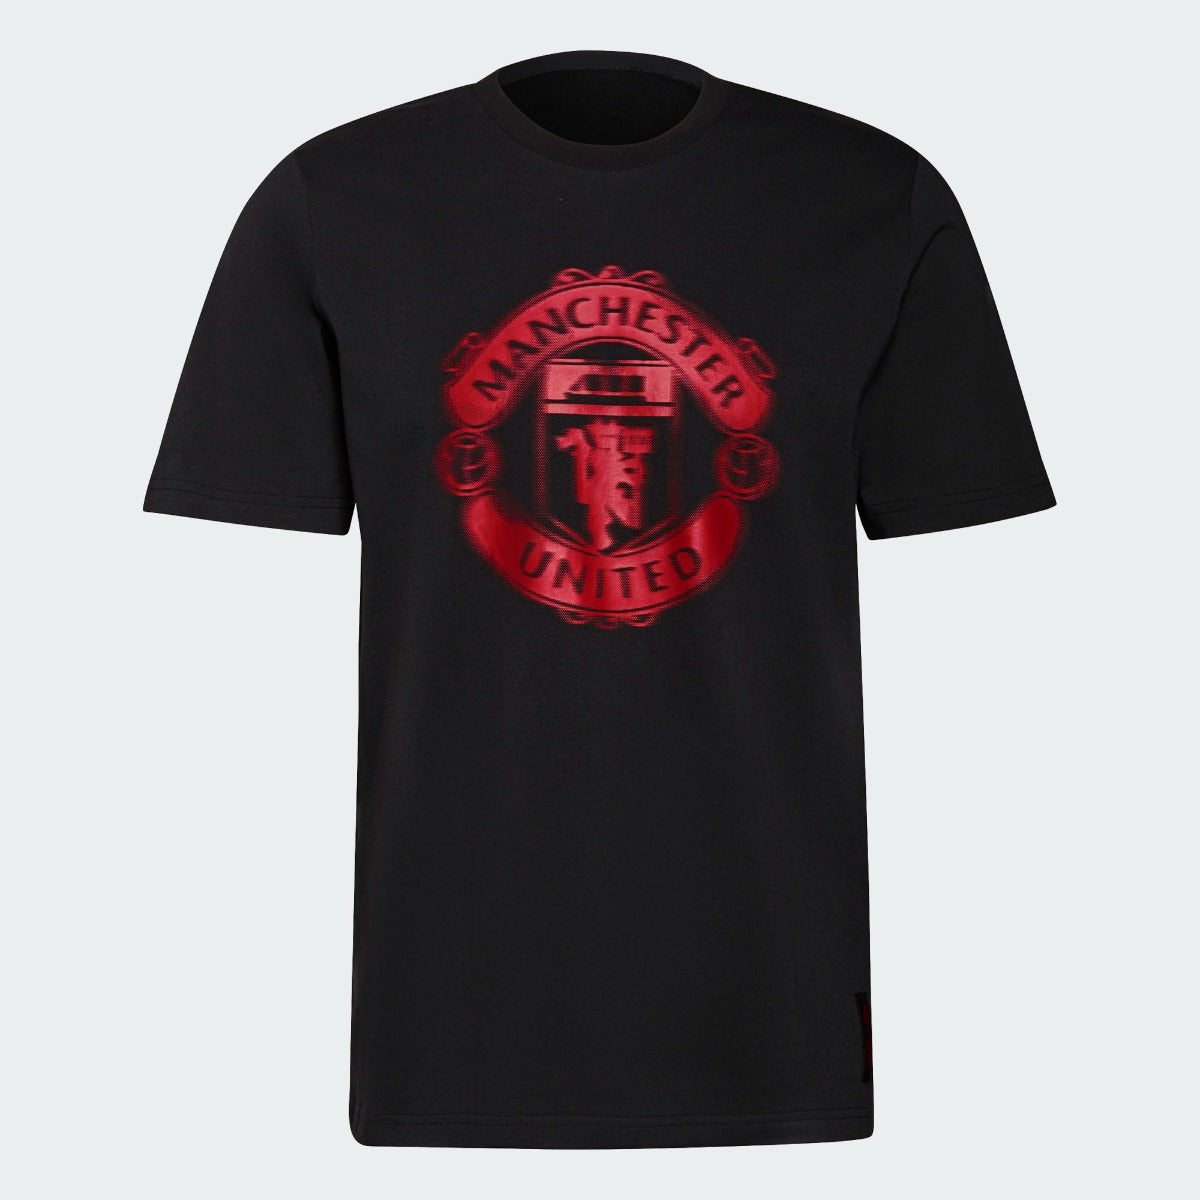 Adidas 2021-22 Manchester United Tee - Black-Red (Front)